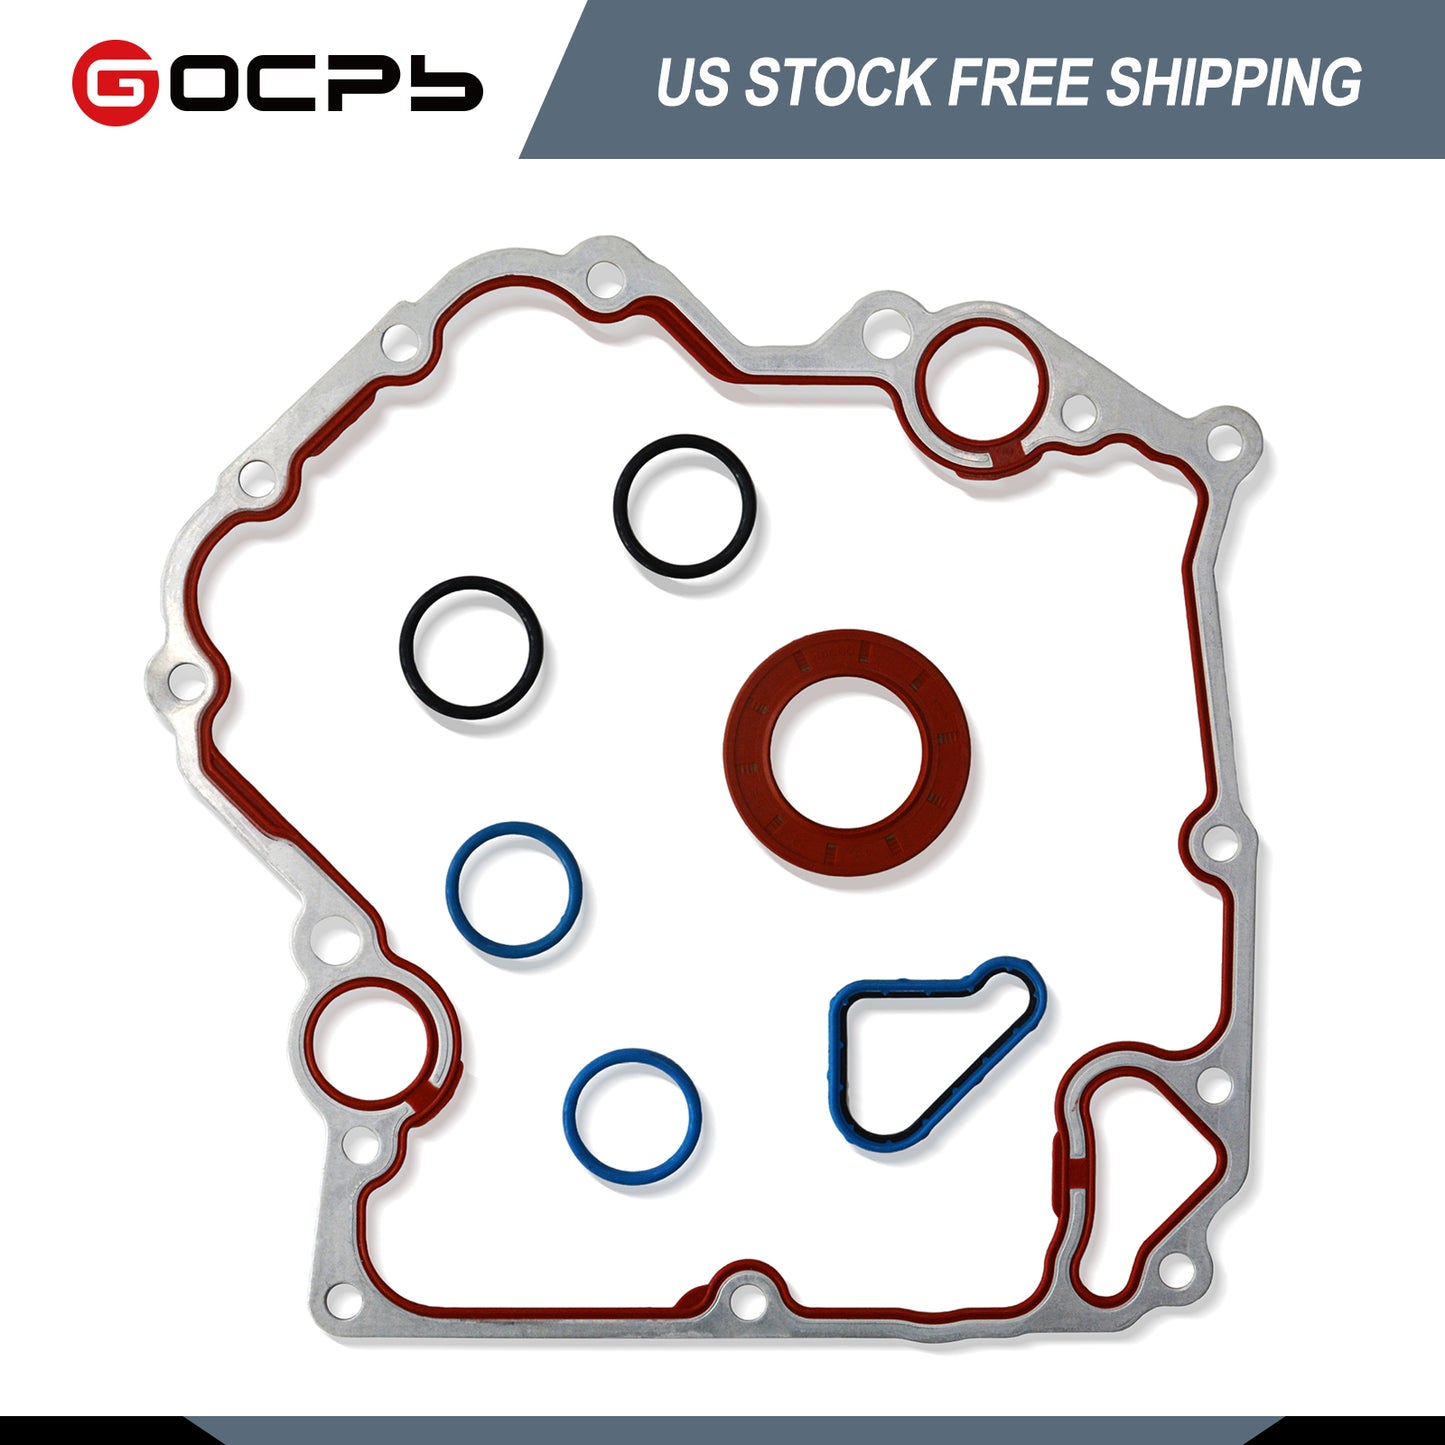 GOCPB Timing Cover Gasket Kit TCS46000 Compatible with Grand Cherokee 4.7L 1999 2000 2001 Compatible with Raider 2006-2007 4.7L Vin N Compatible with Dakota 2004 2005 2006 2007 2008 2009 3.7L Vin K